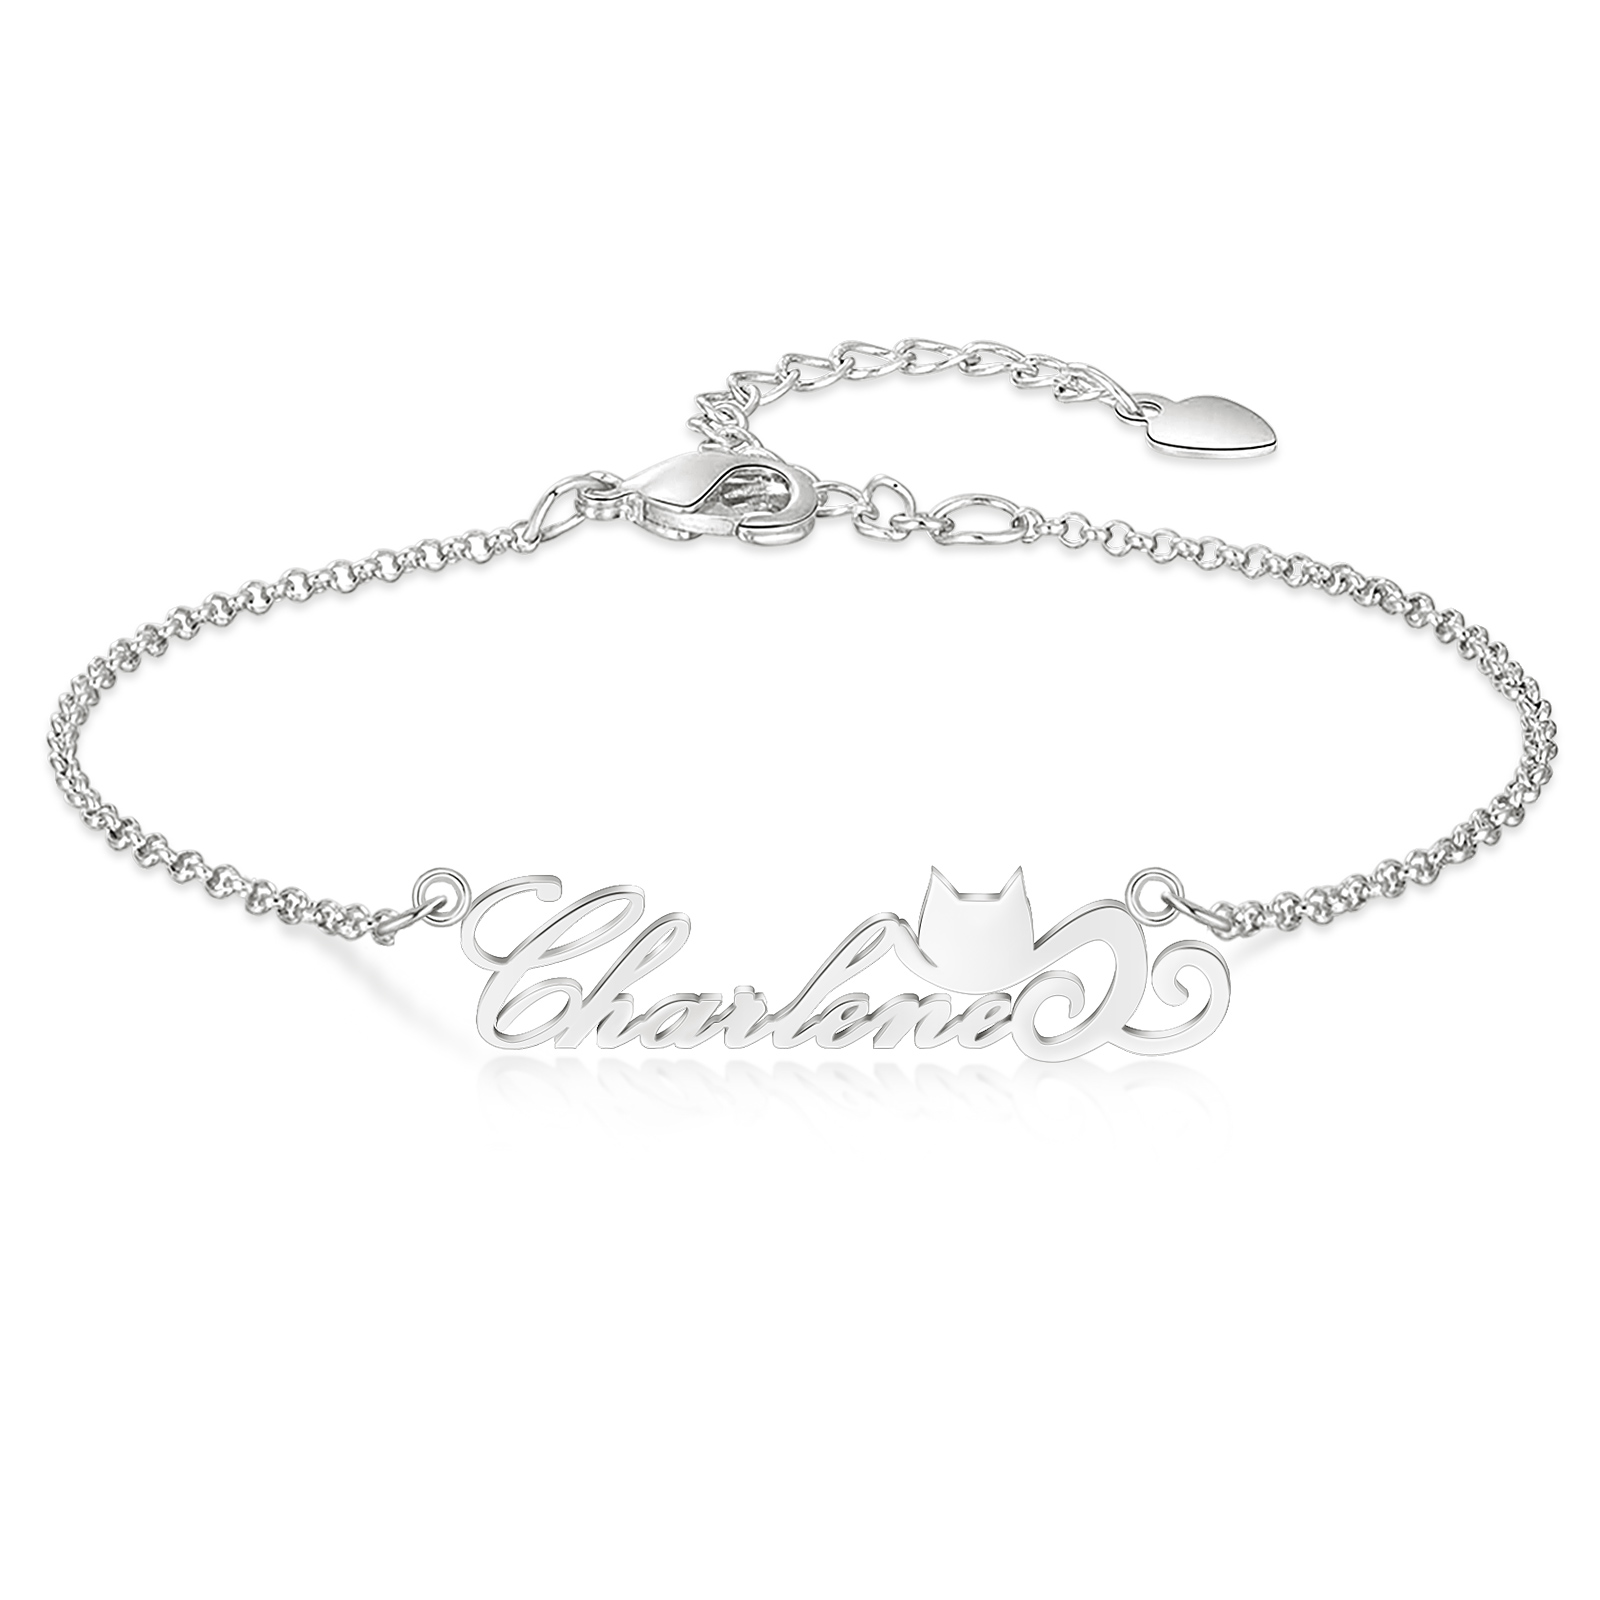 Personalized Engraved Name Bracelet with Cat Avatar Gift for Her-YITUB